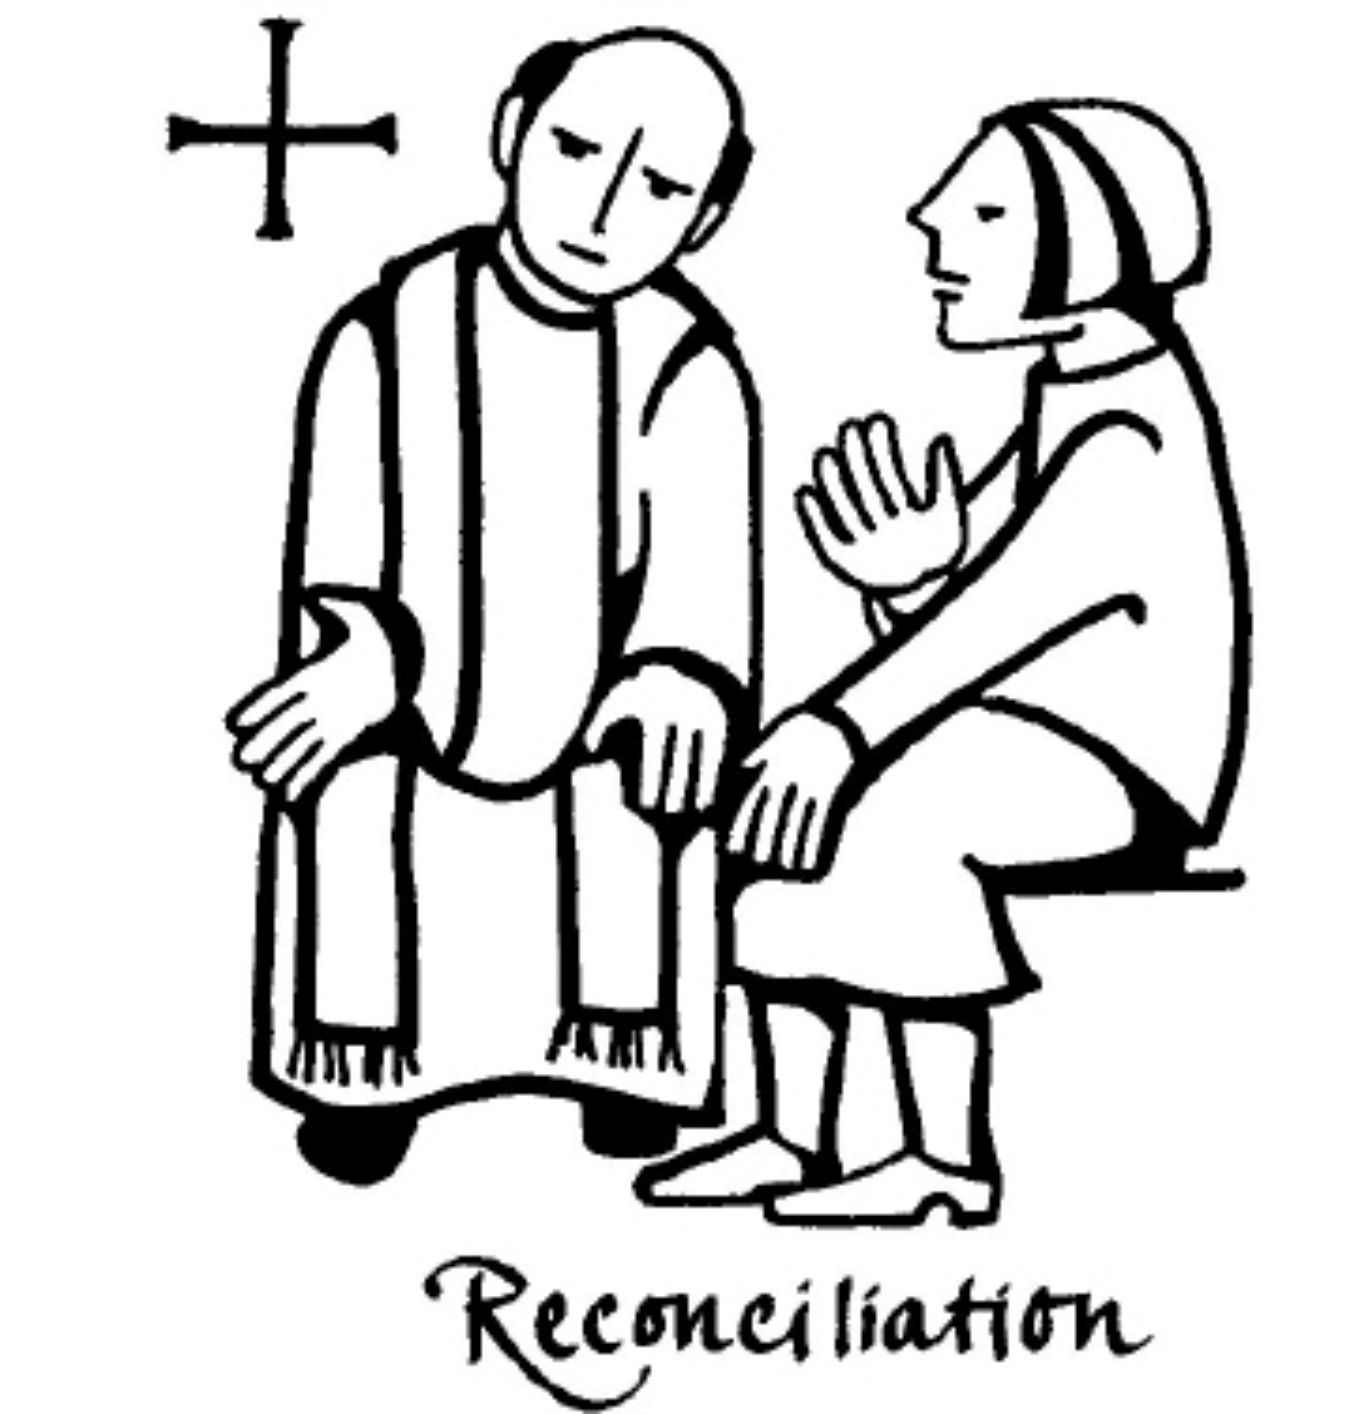 Pin by greg mikhalevich on Reconciliation | Reconciliation, Reconciliation  catholic, Sacrament